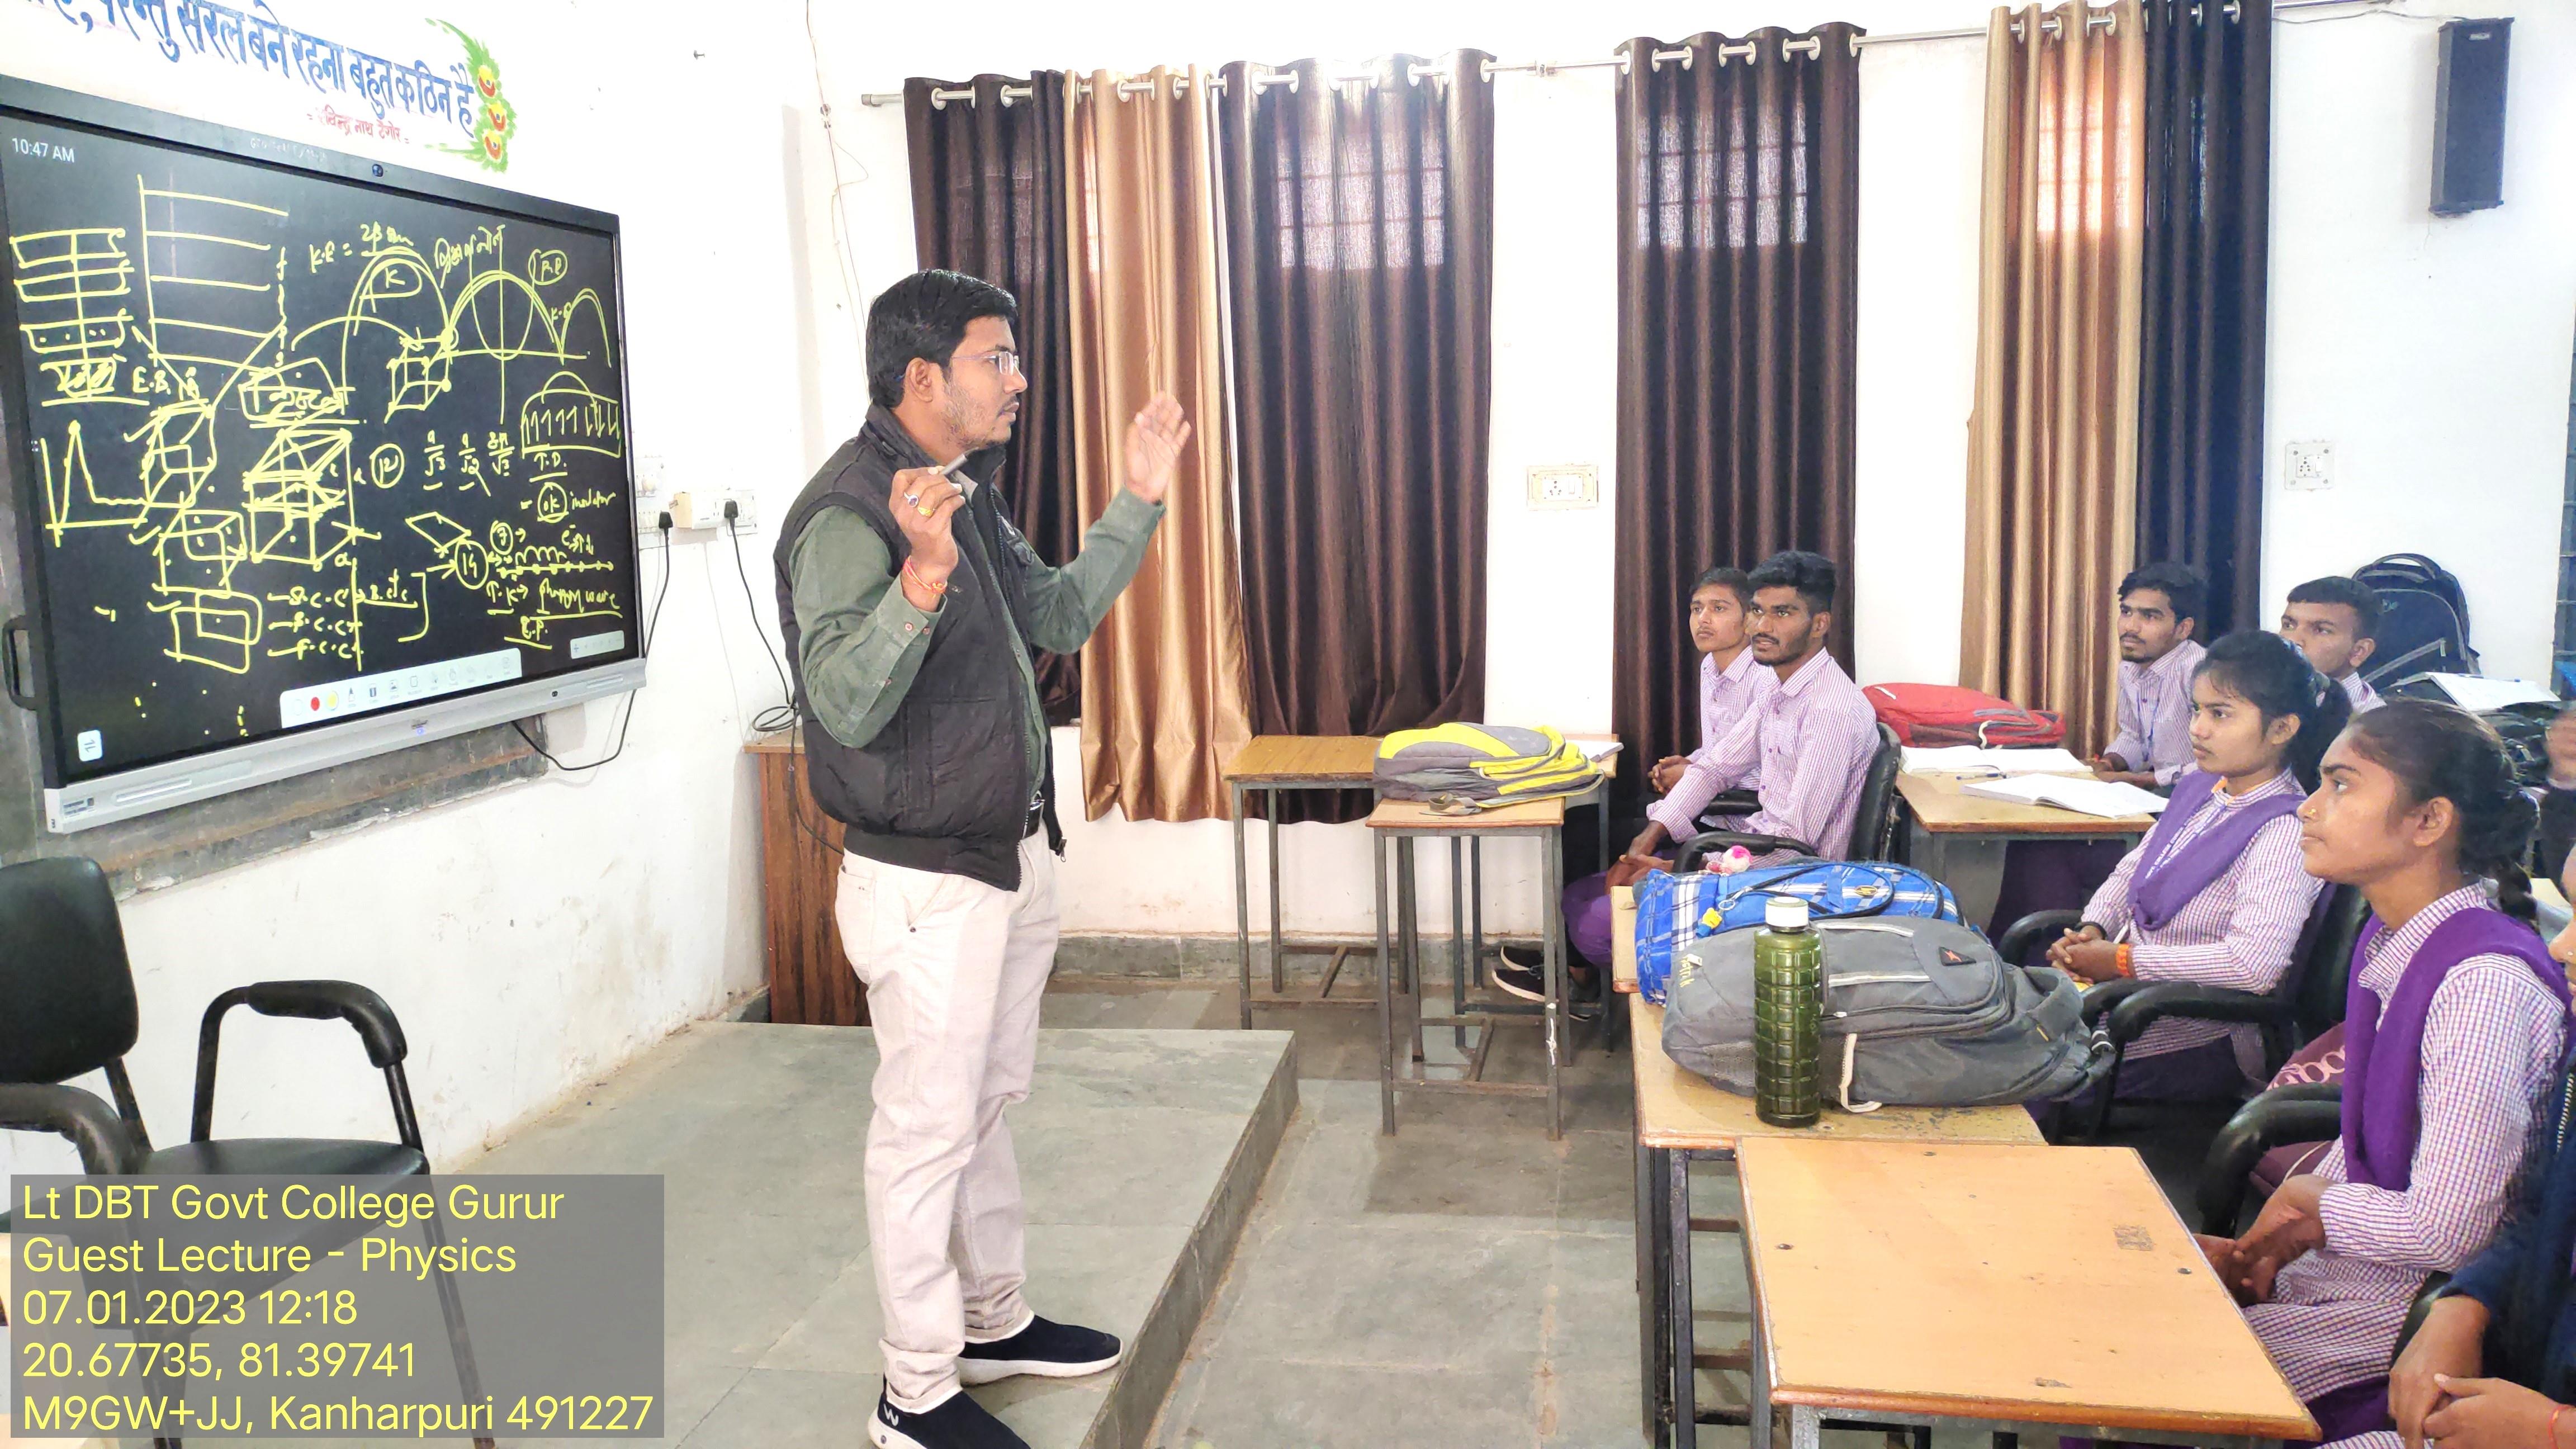 guest Lecture on Oscillation and waves - Photo Govt. college Gurur